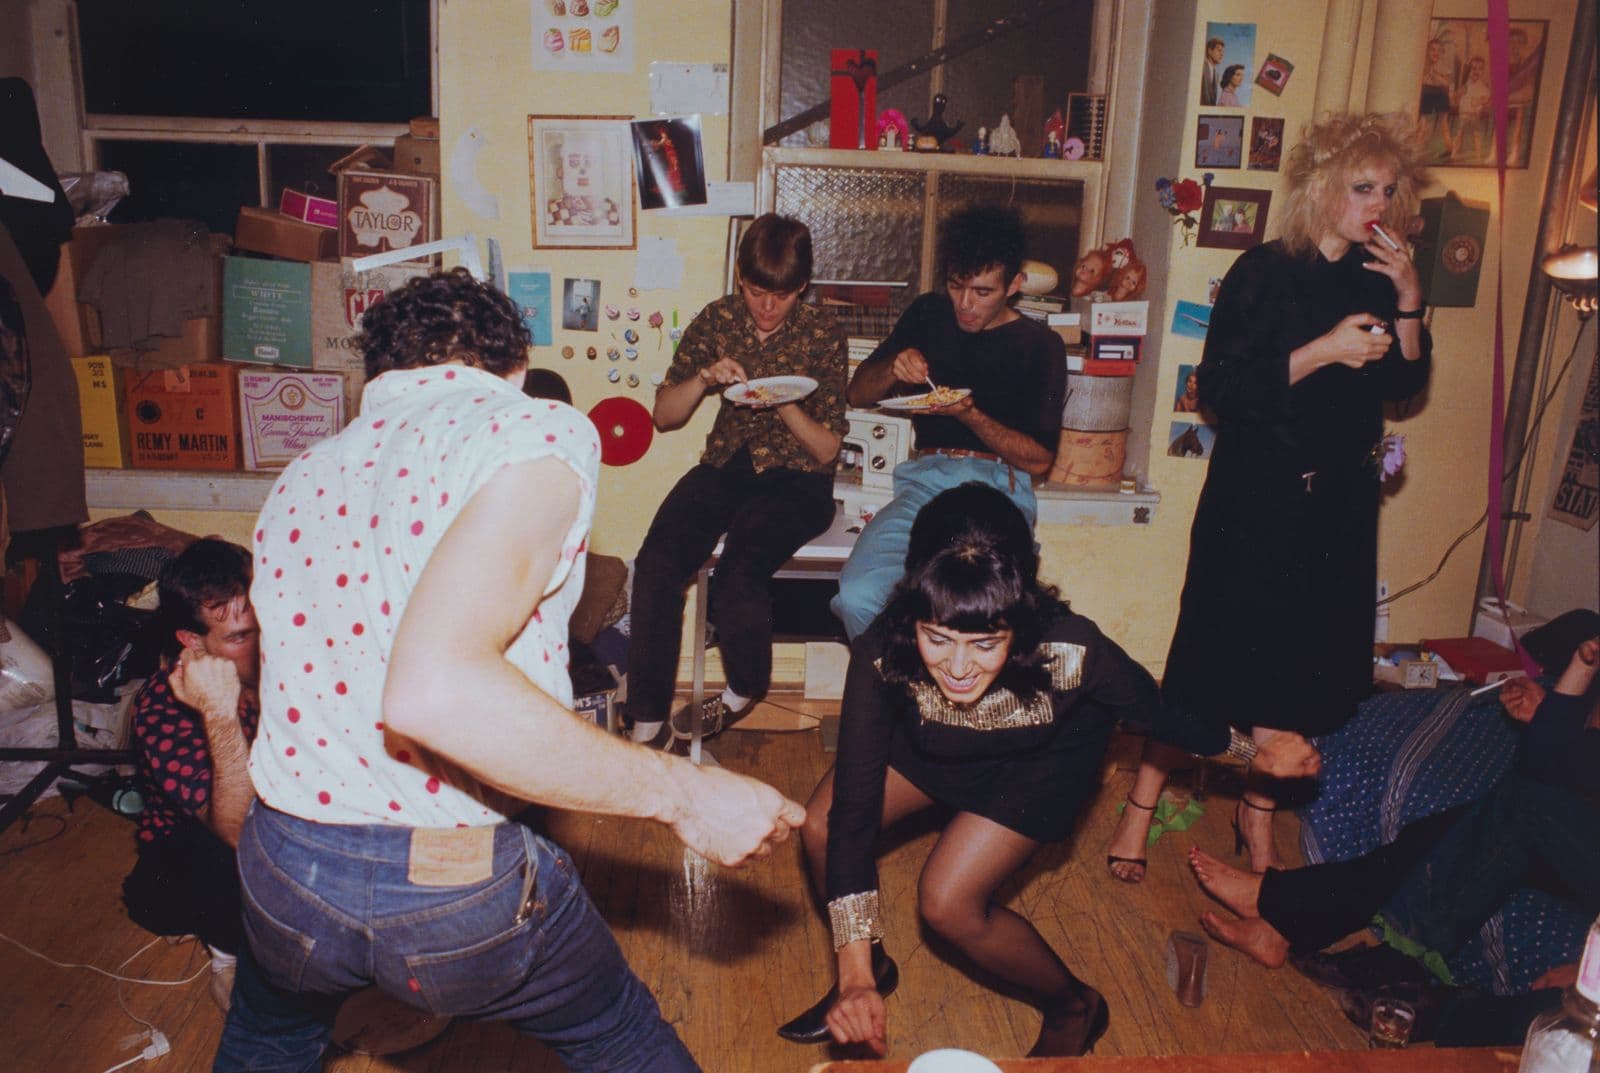 Friends of artist Nan Goldin dancing in an apartment at a birthday party.